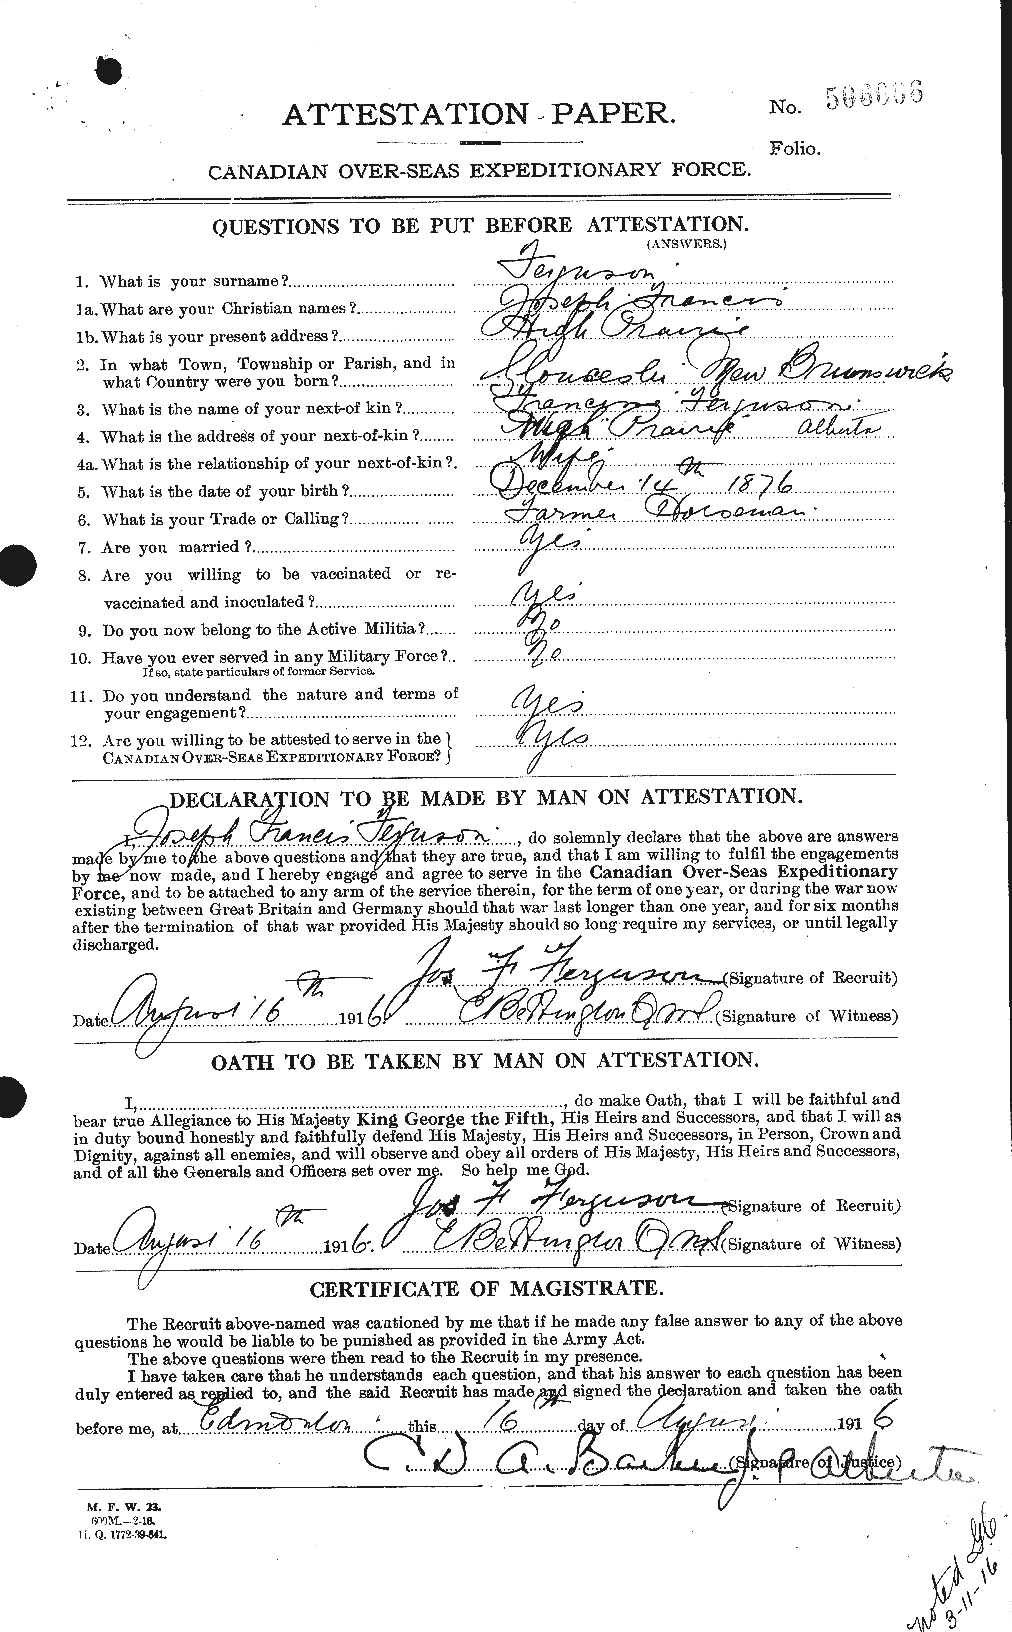 Personnel Records of the First World War - CEF 320390a